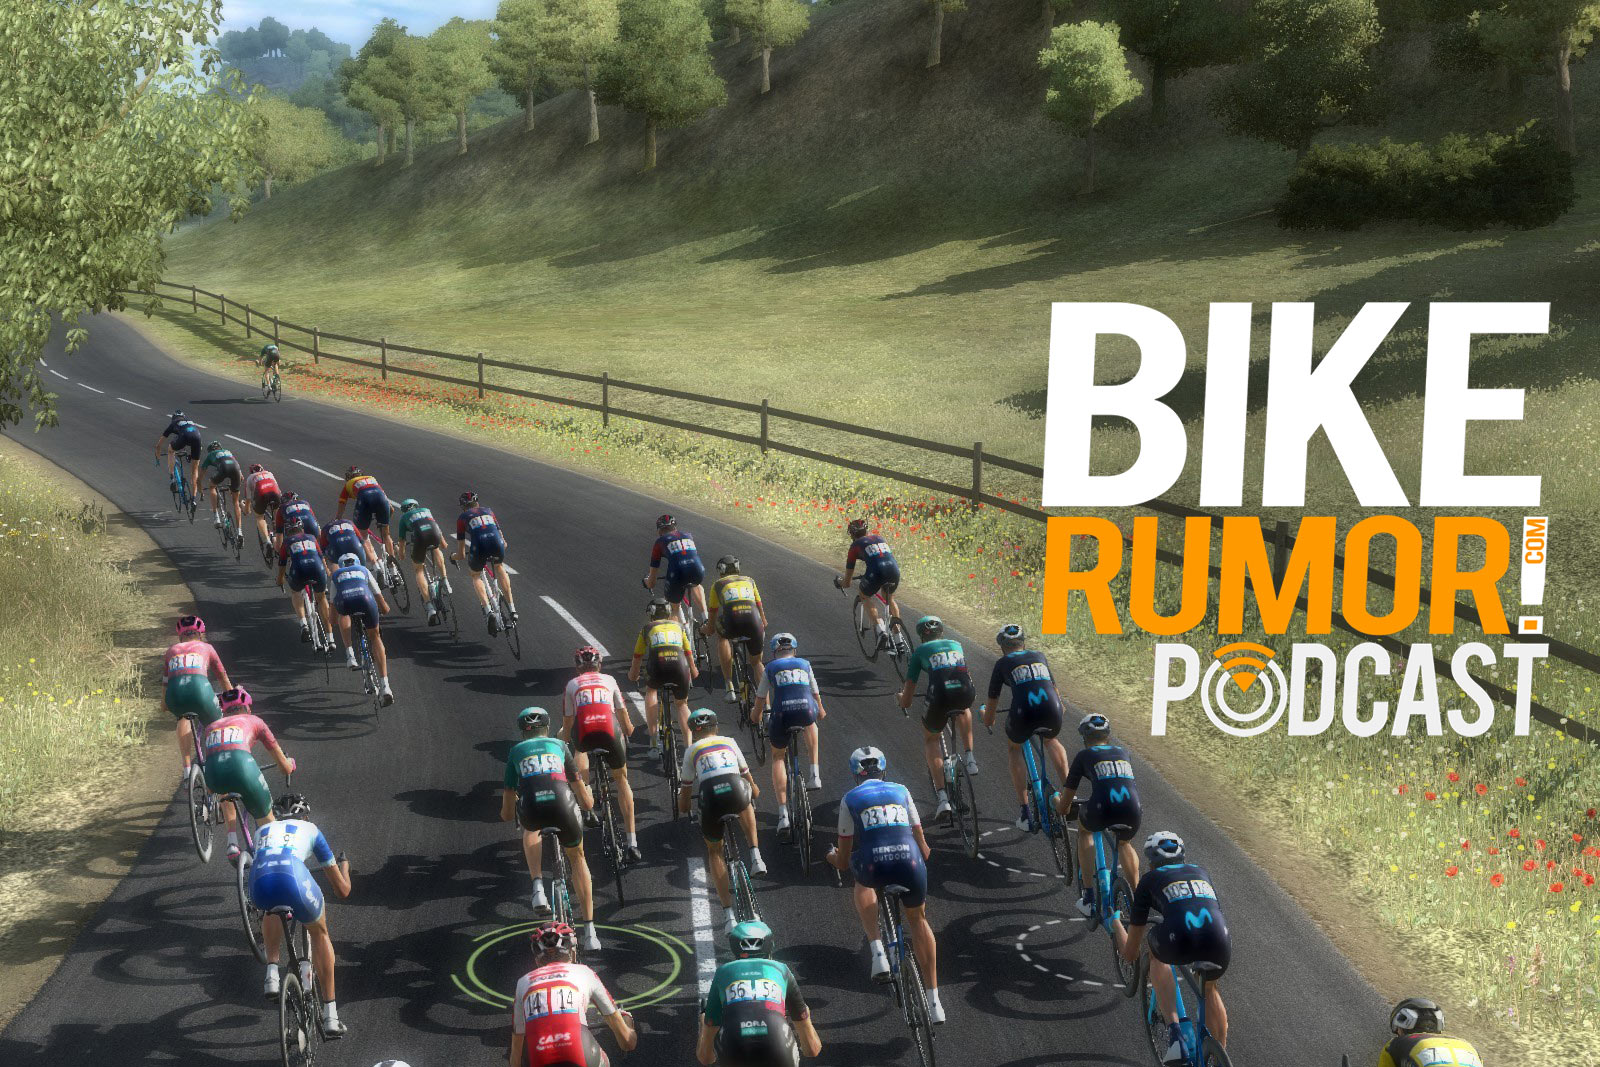 Calibre tørst Betydning Podcast #060 - Inside the Pro Cycling Manager video game - Bikerumor